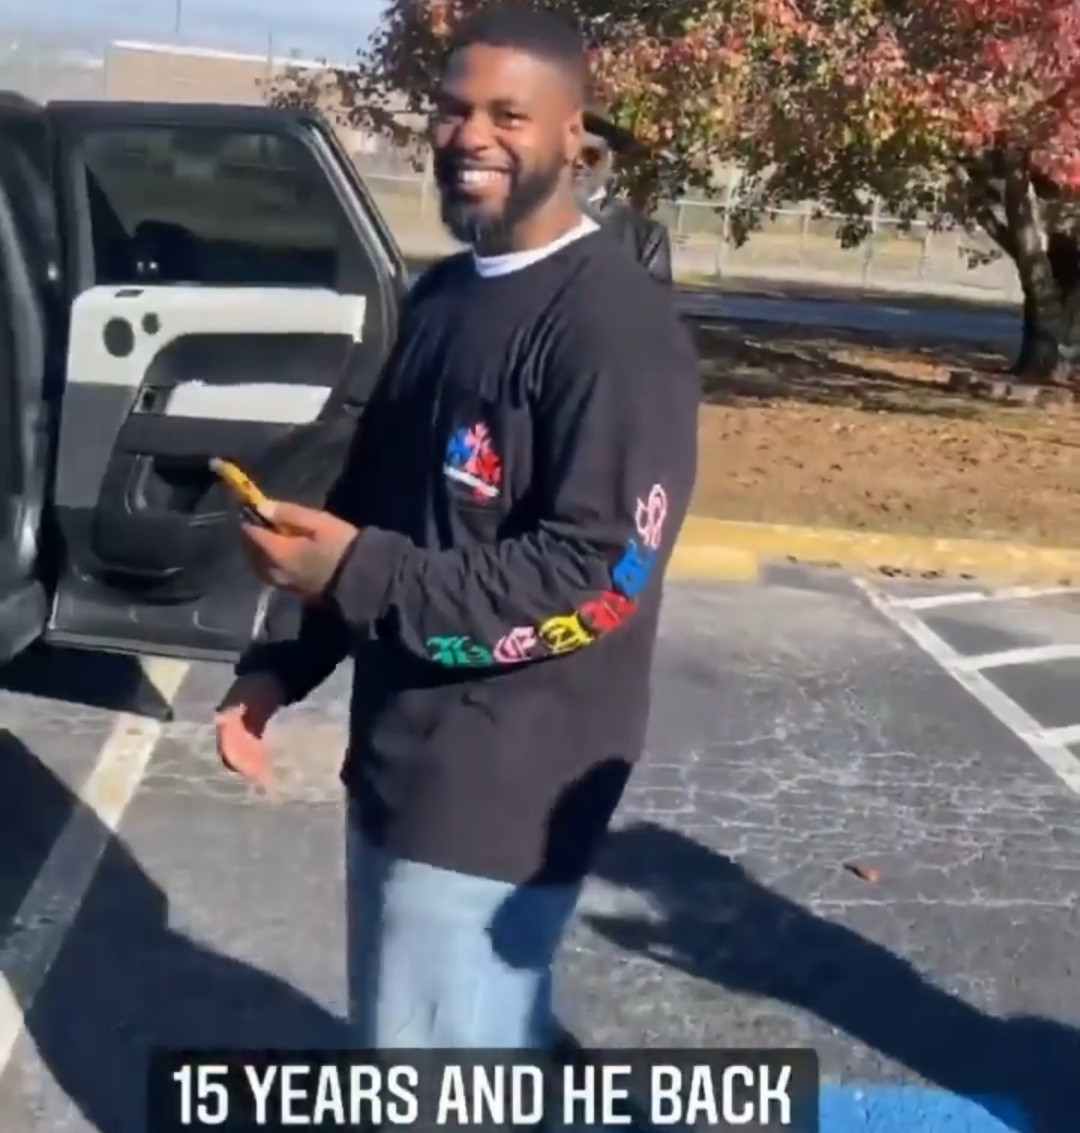 Offset welcomes his brother home after serving 15 years in prison (video)